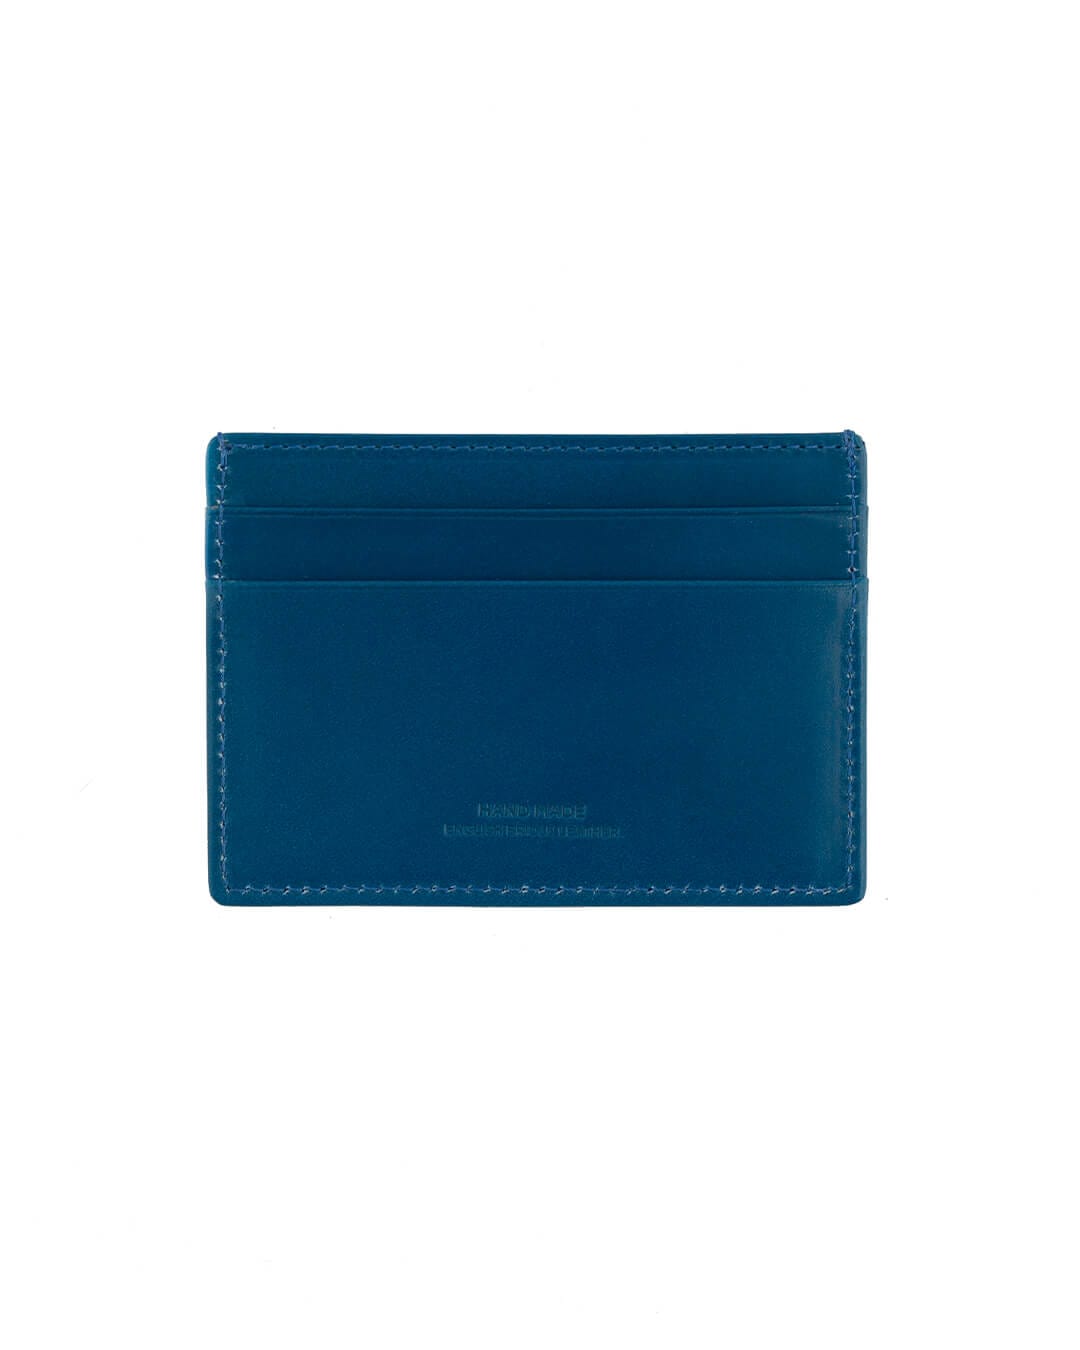 Cavesson's Wallets Cavesson's Peacock Card Case